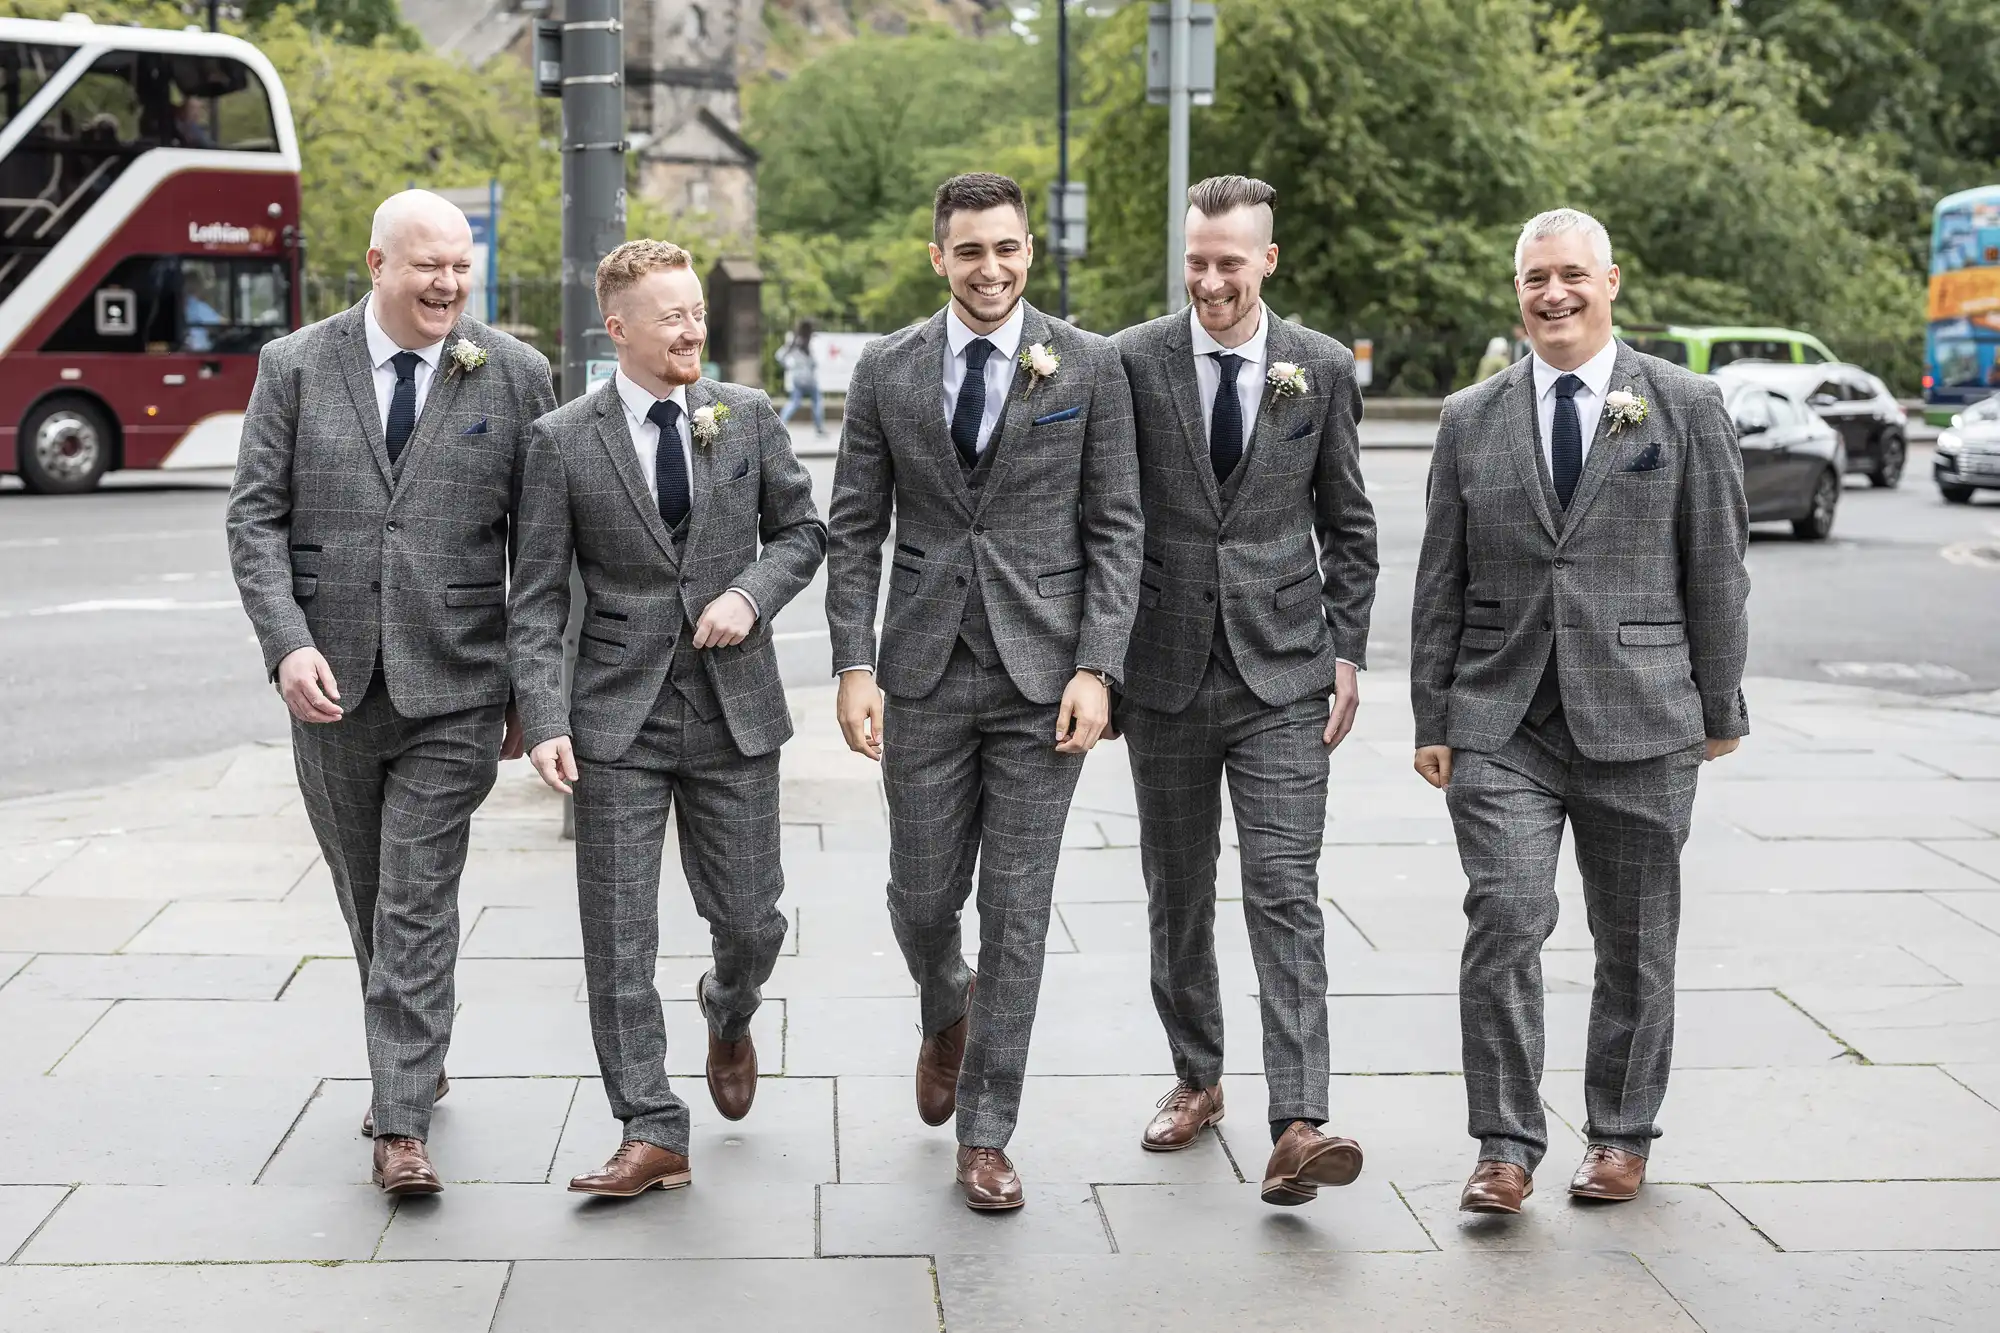 Five men in matching gray suits and boutonnieres walk together smiling on a city sidewalk, with a bus and greenery in the background.